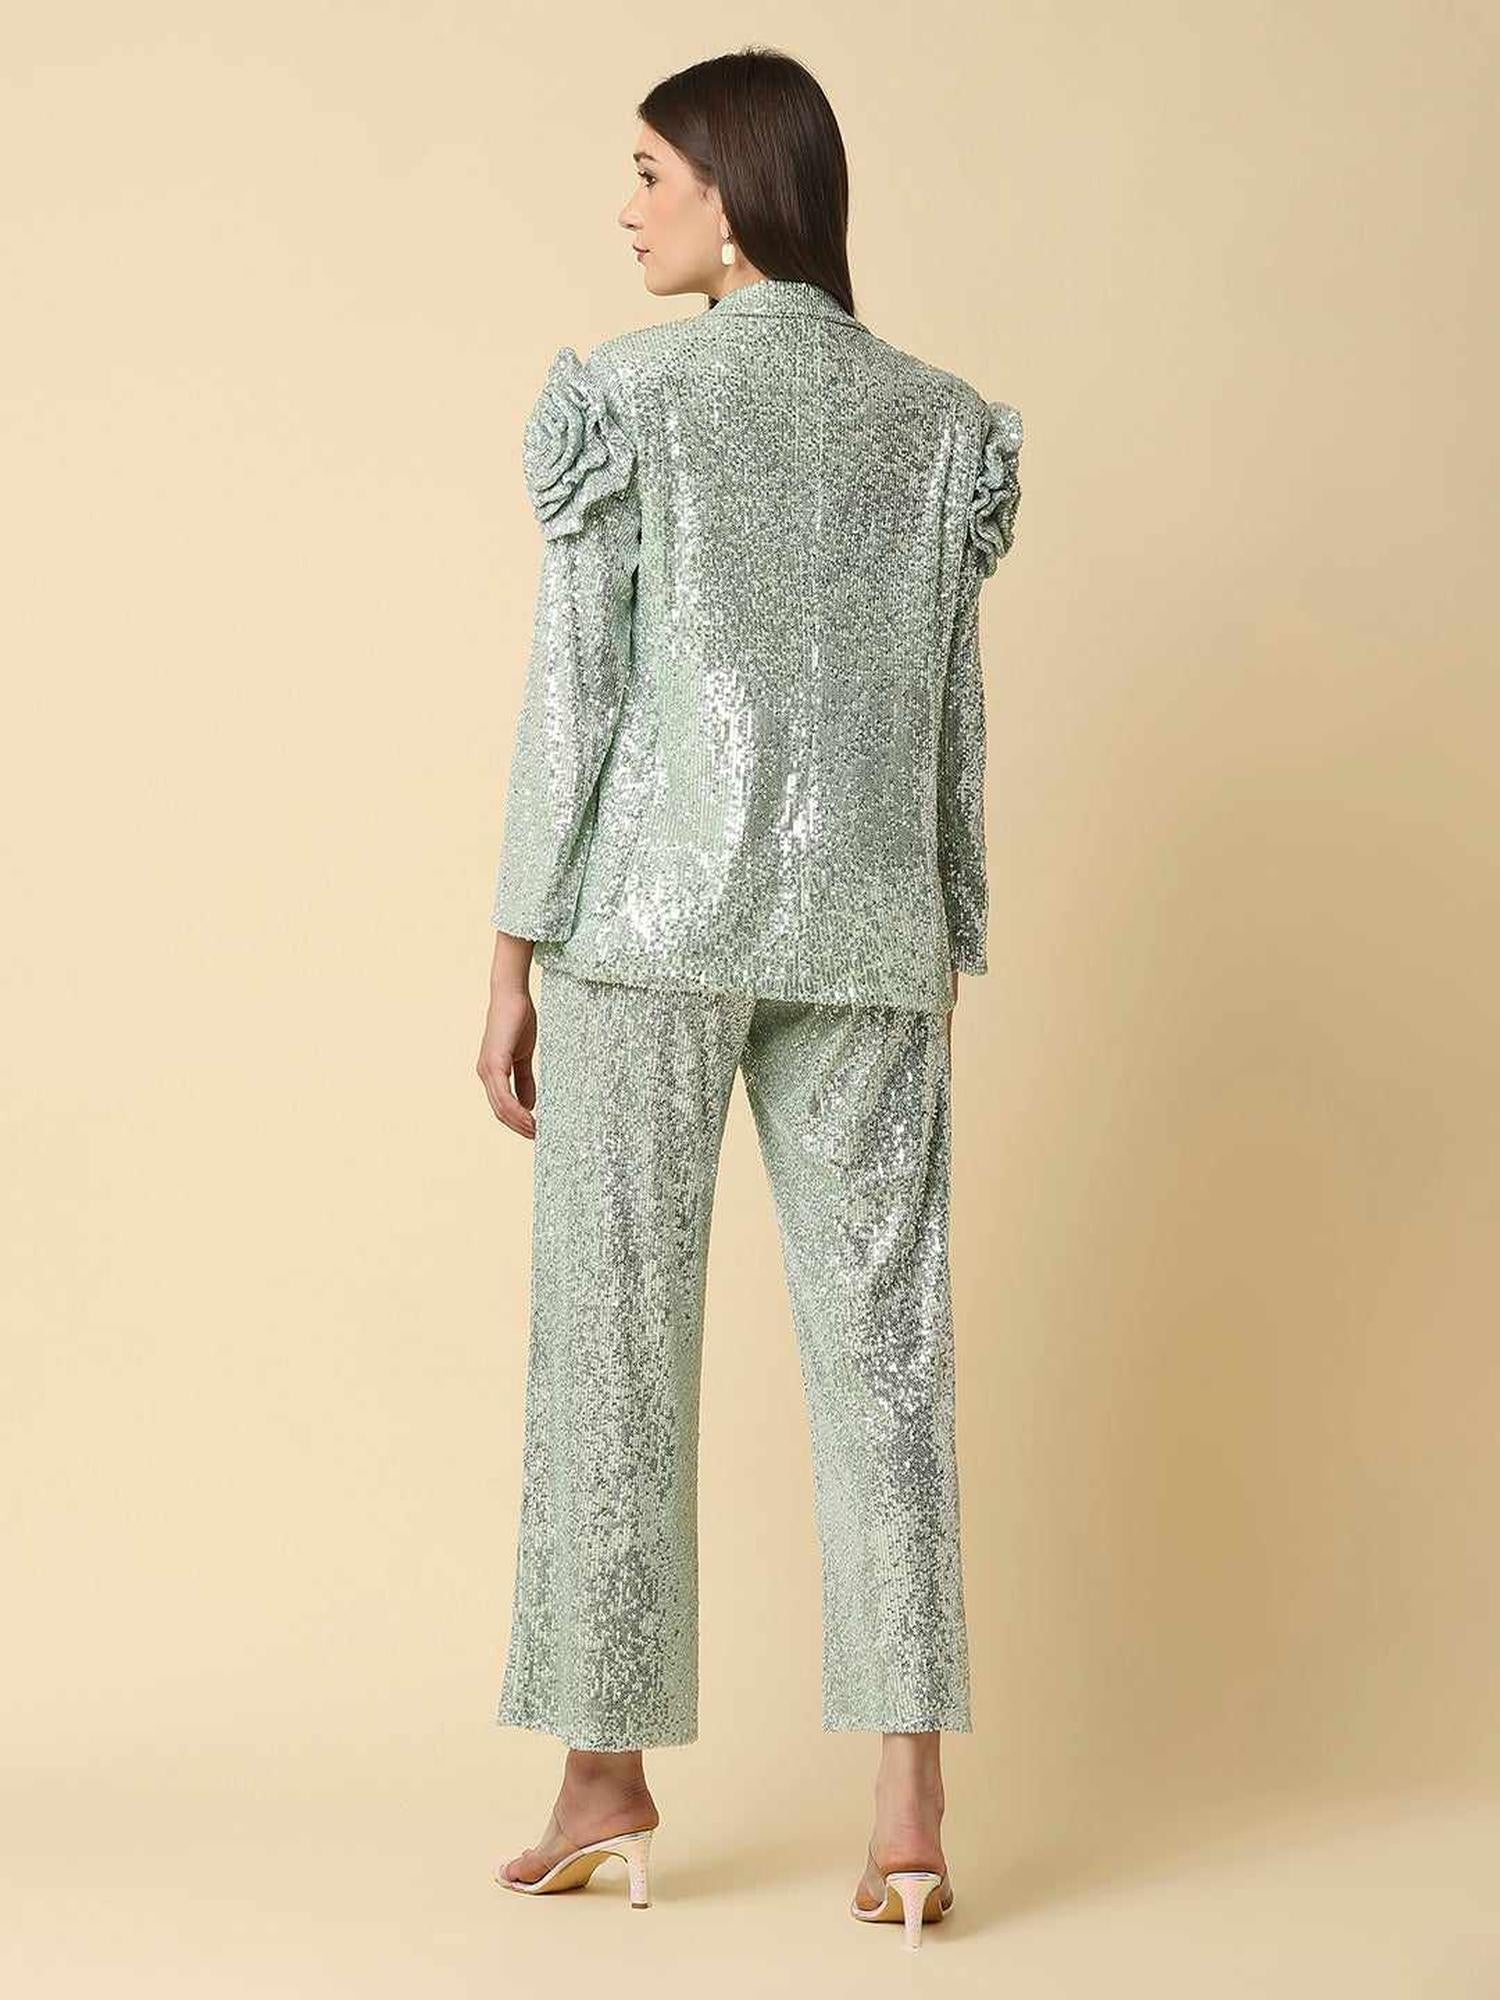 Glittering Sequined Tulle High Rise Pants